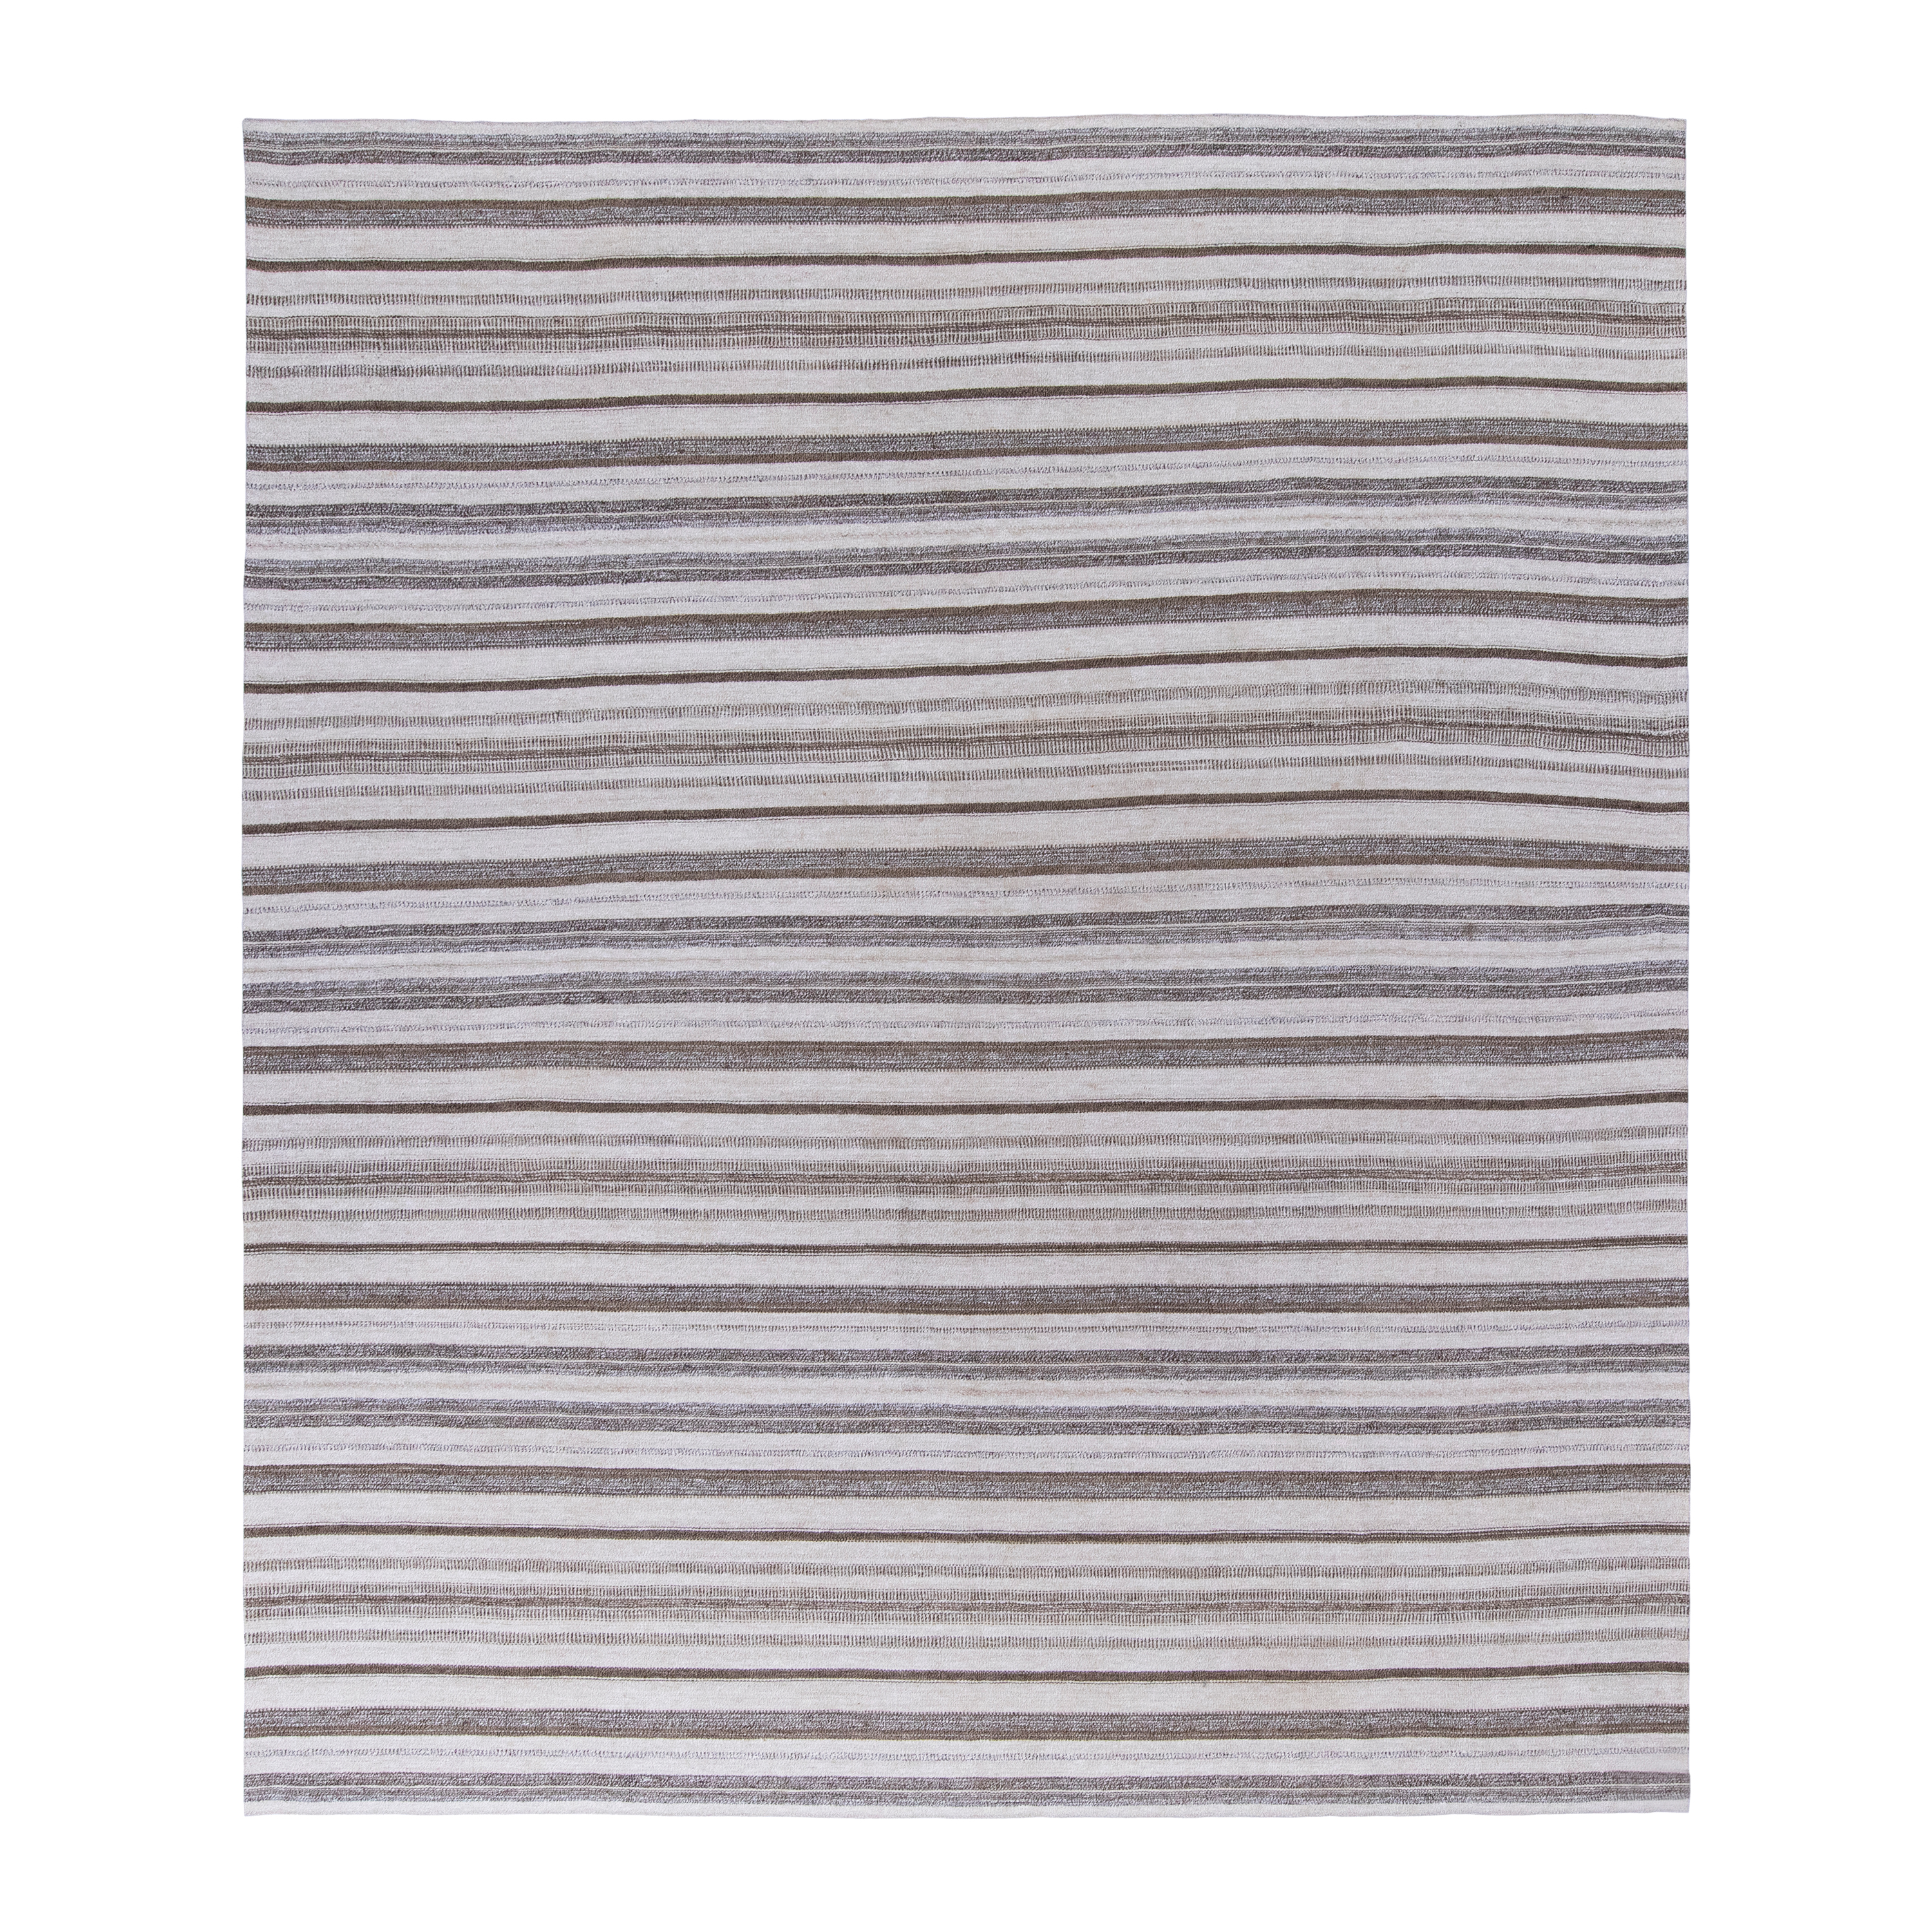 This Mid century Flatweave is handwoven and made of 100% wool.